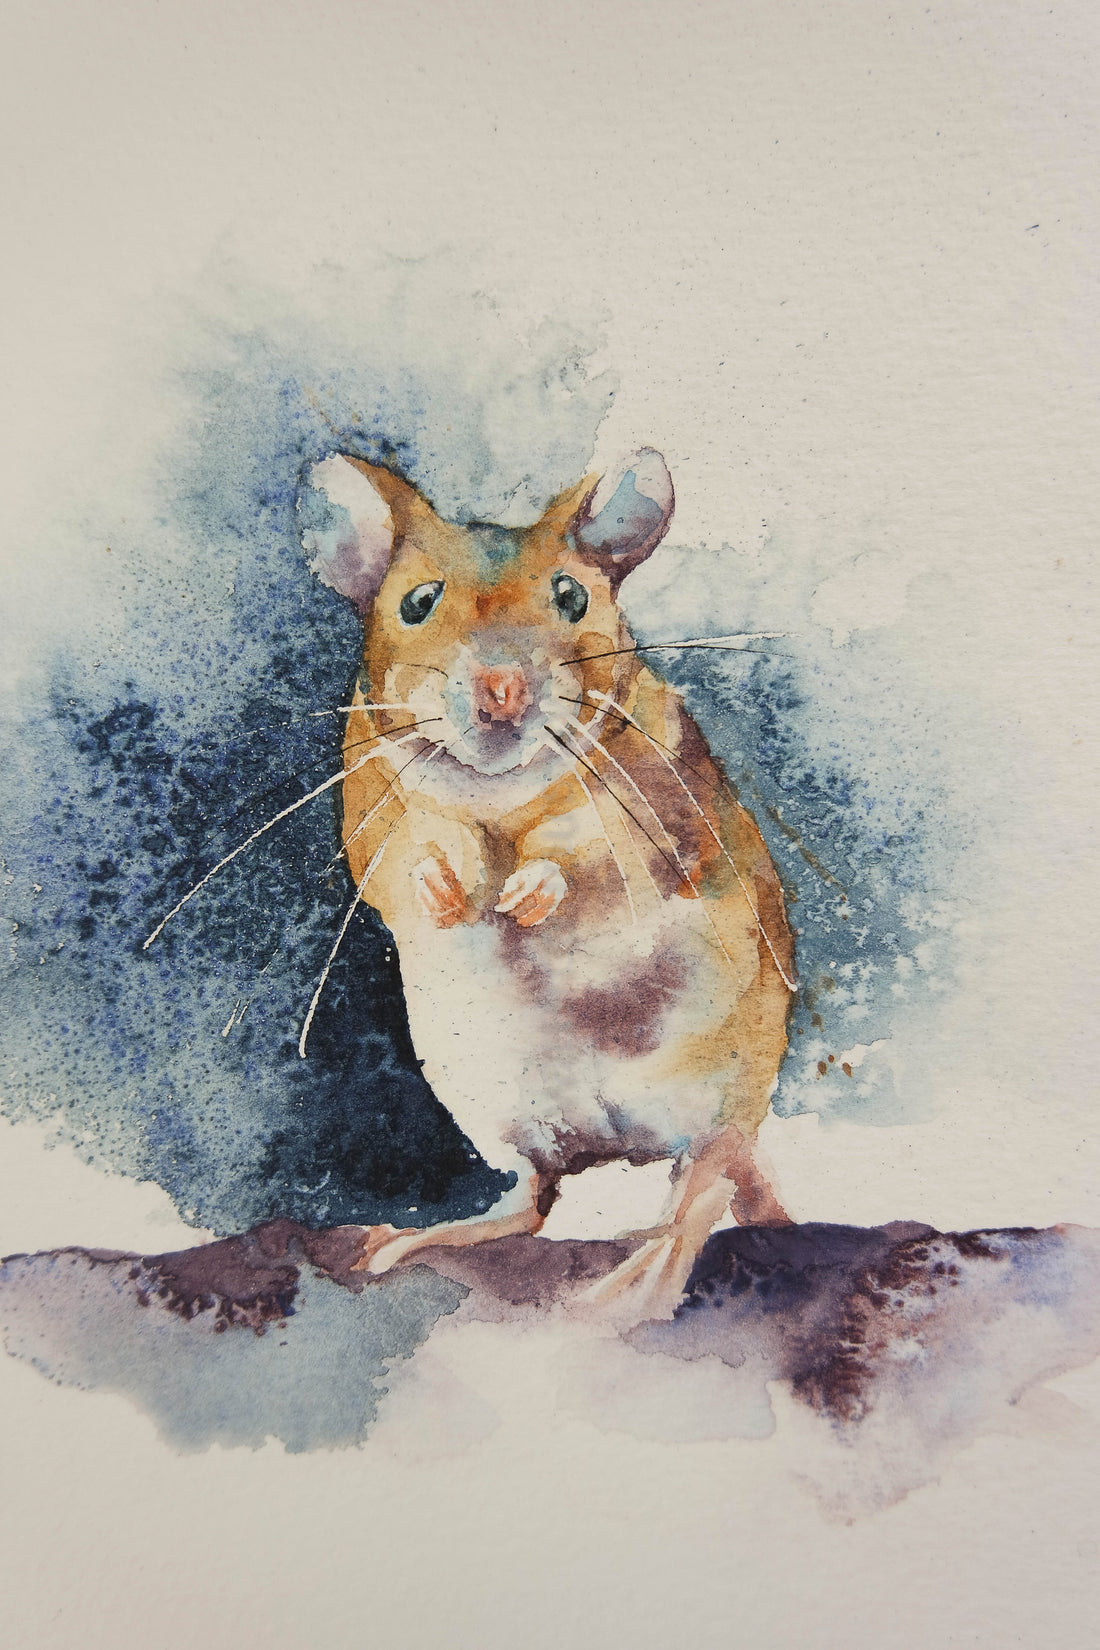 Painting a mouse